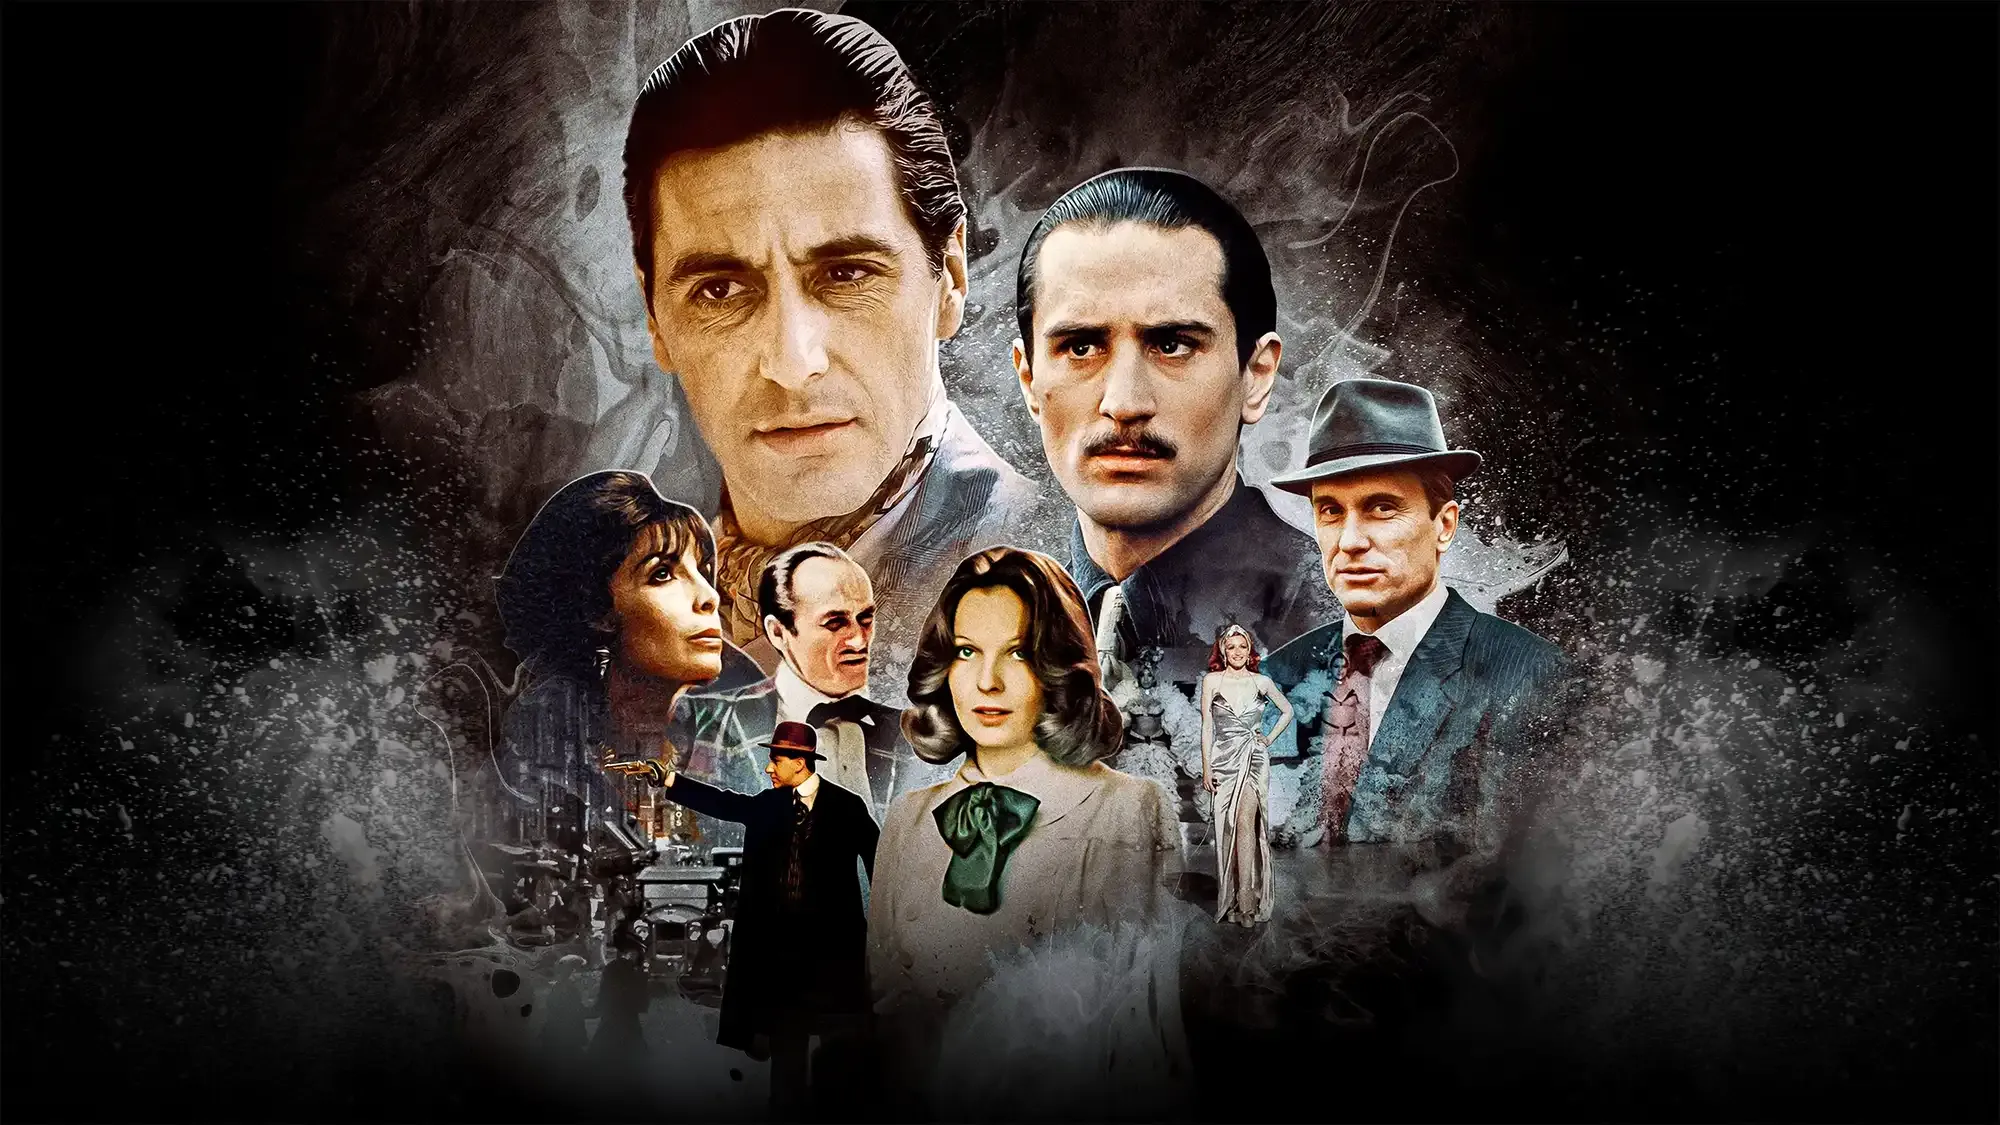 The Godfather Part II movie review